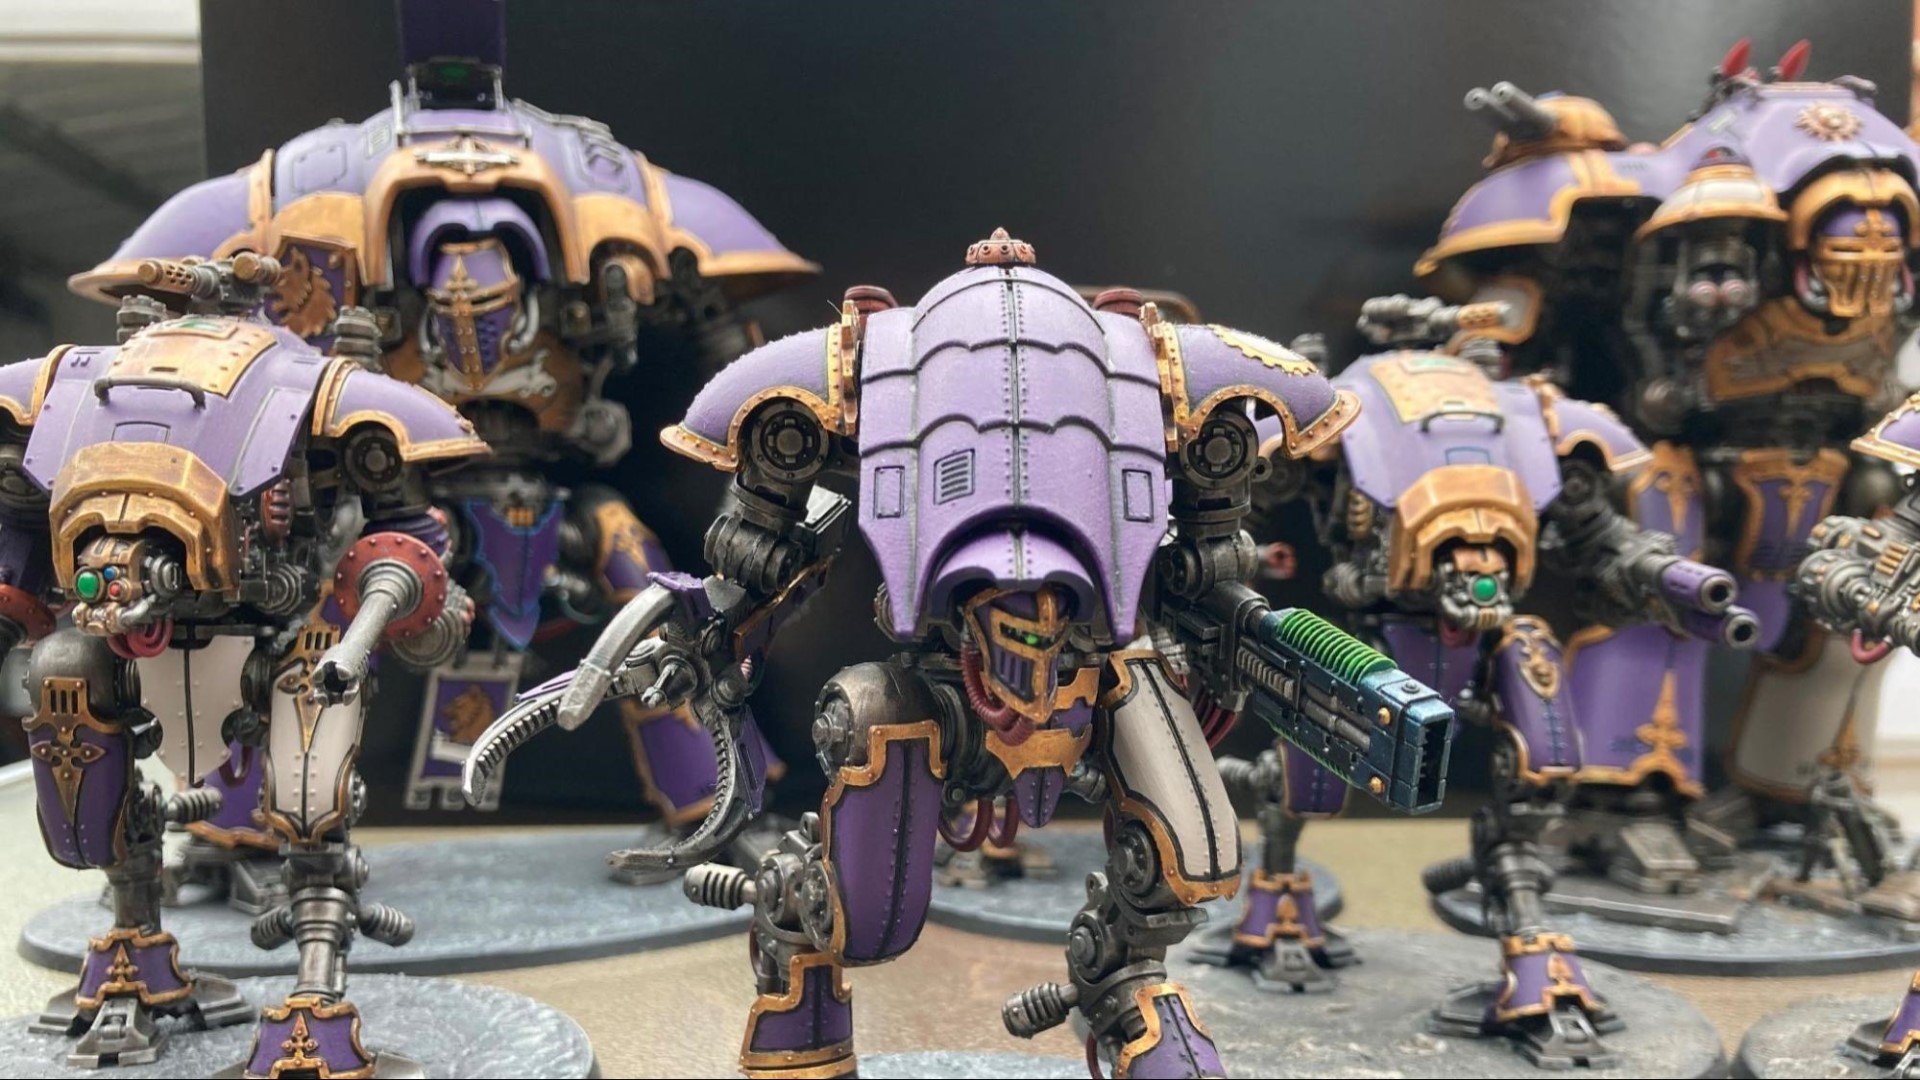 Warhammer 40k Imperial Knights army guide - Photo provided to the author by Alan Bailey showing a Forge World Imperial Knight model in purple and gold paint scheme